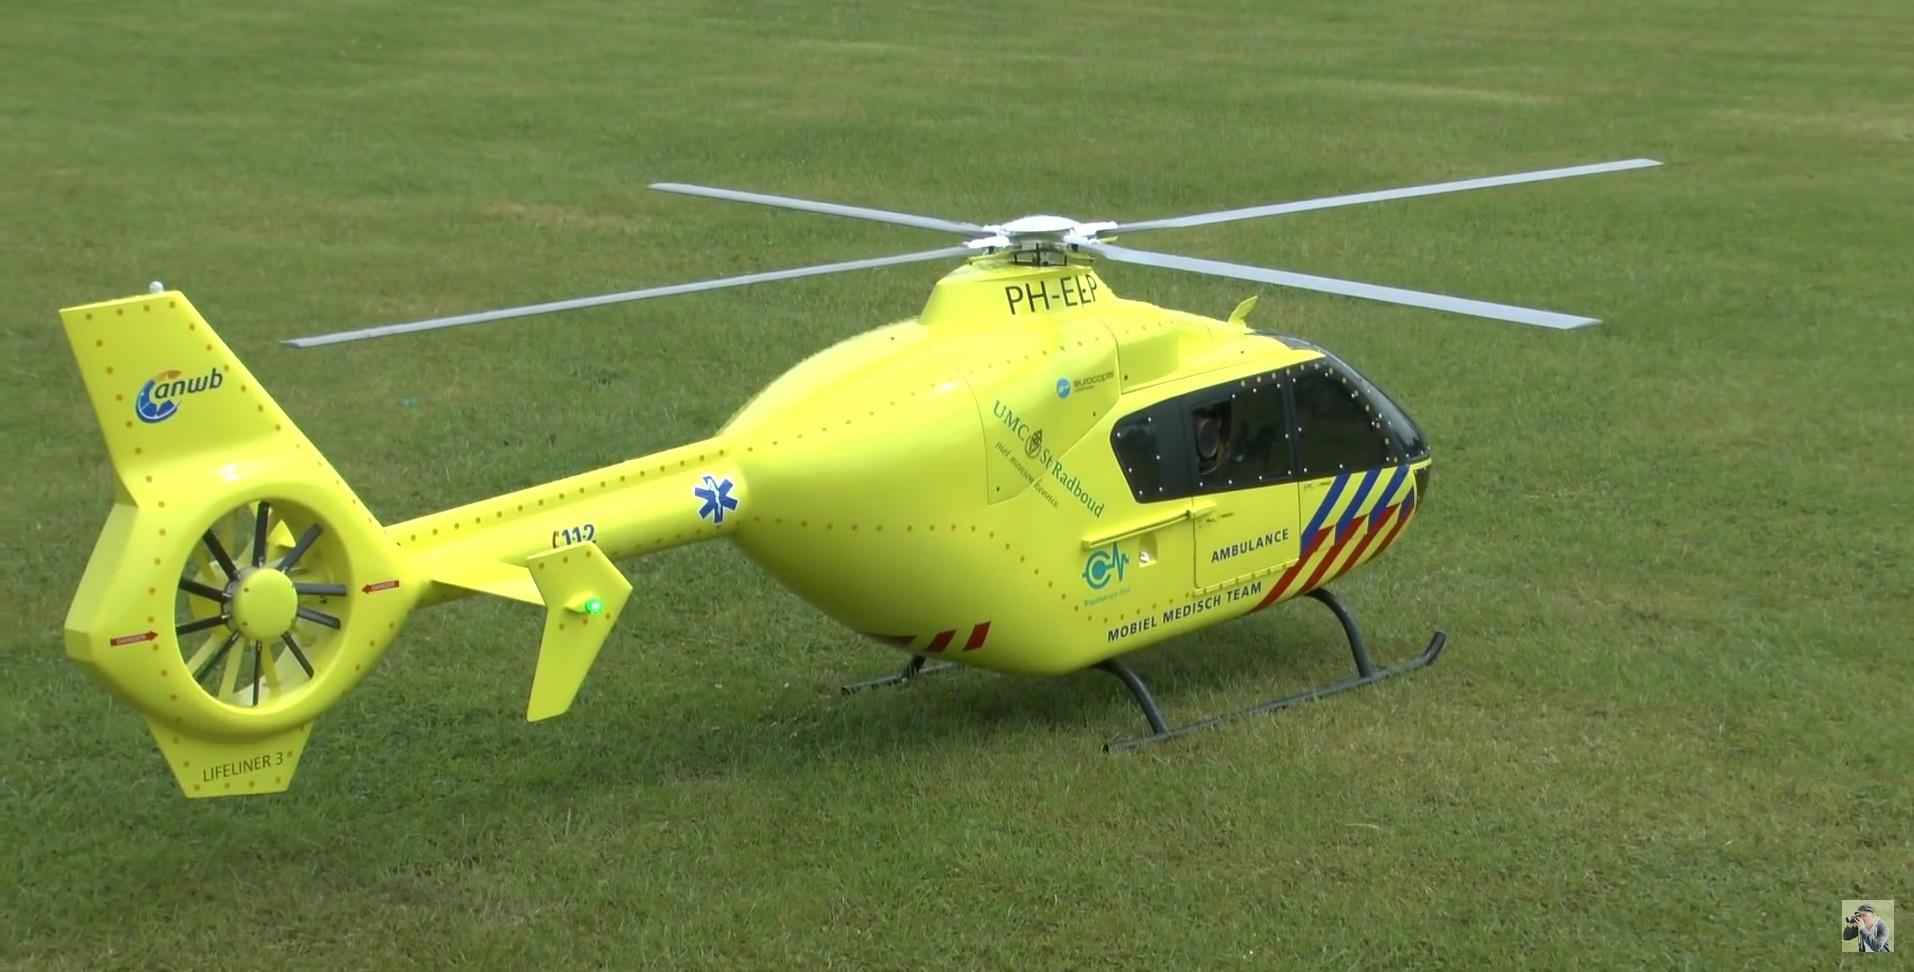 Super Big Rc Turbine Helicopter Price: The cost of owning a super big RC turbine helicopter. 